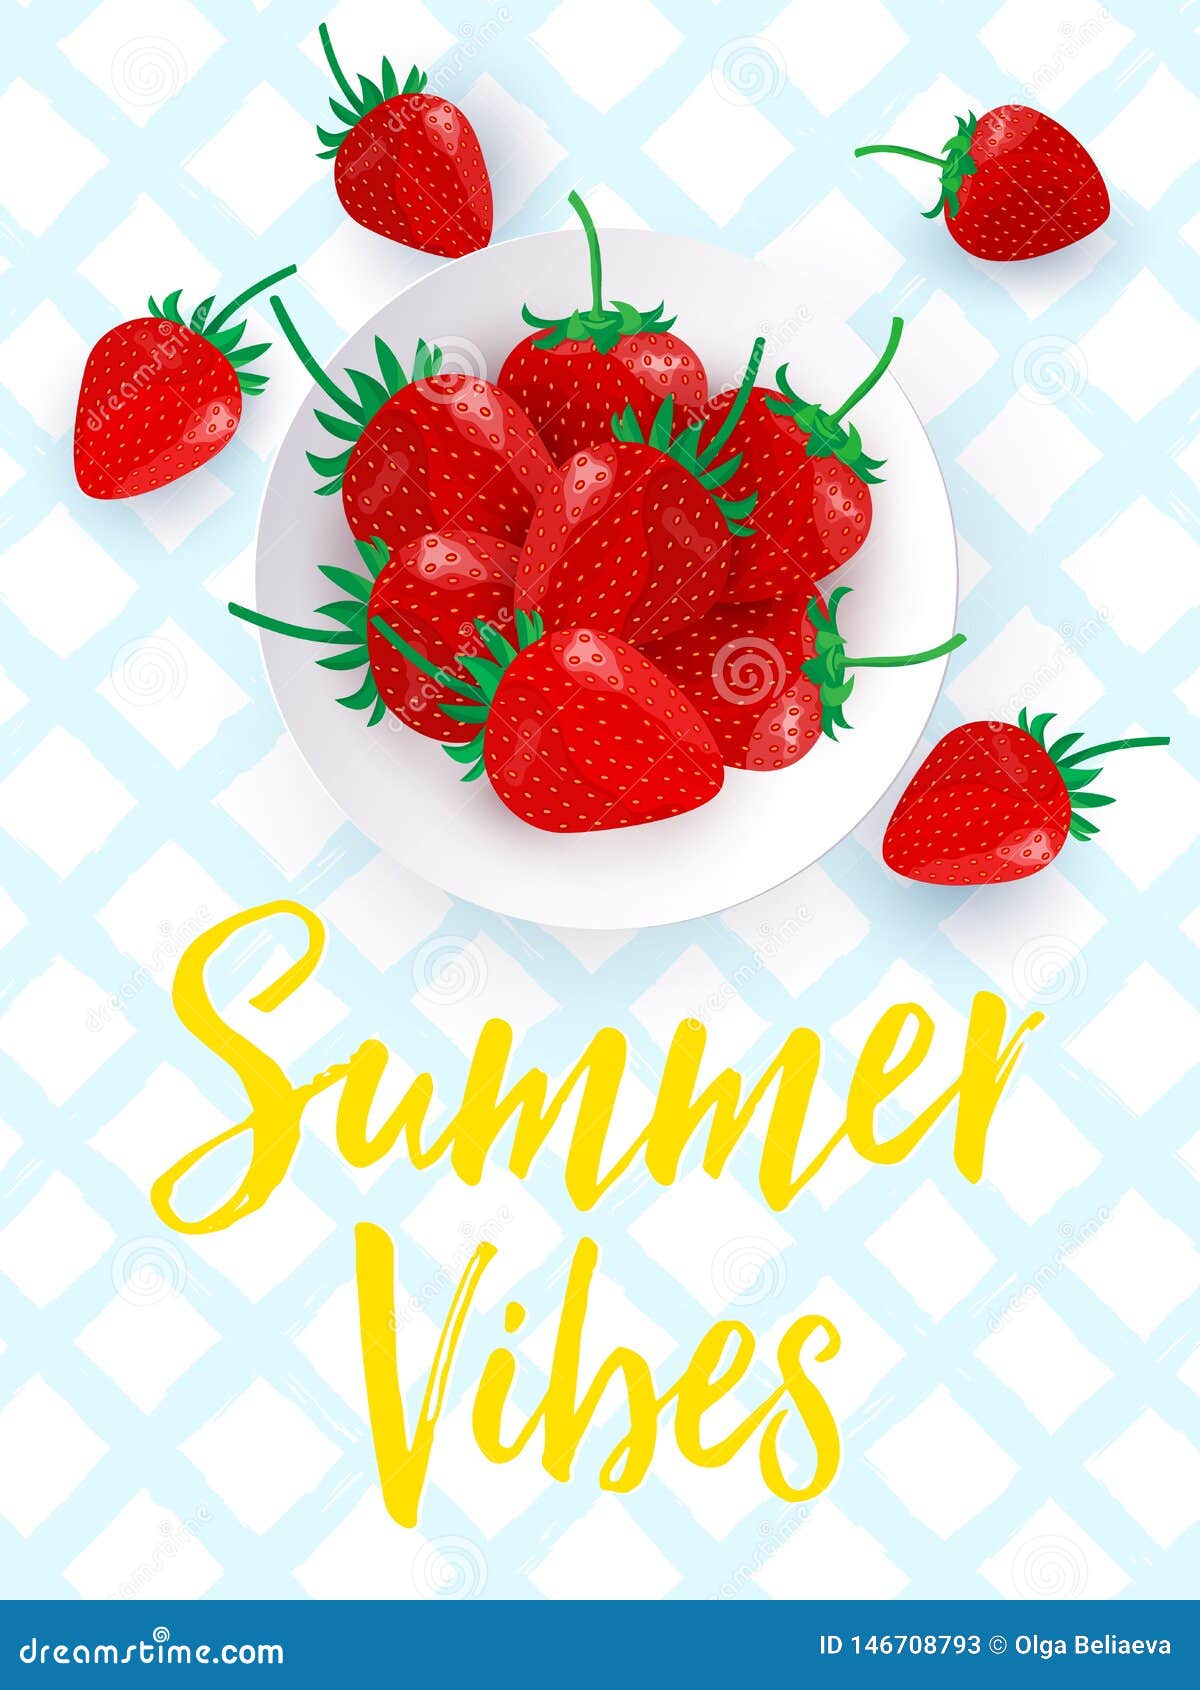 Vector Summer Vibes Typography Vertical Poster With Strawberry Stock Vector Illustration Of Fruit Design 146708793